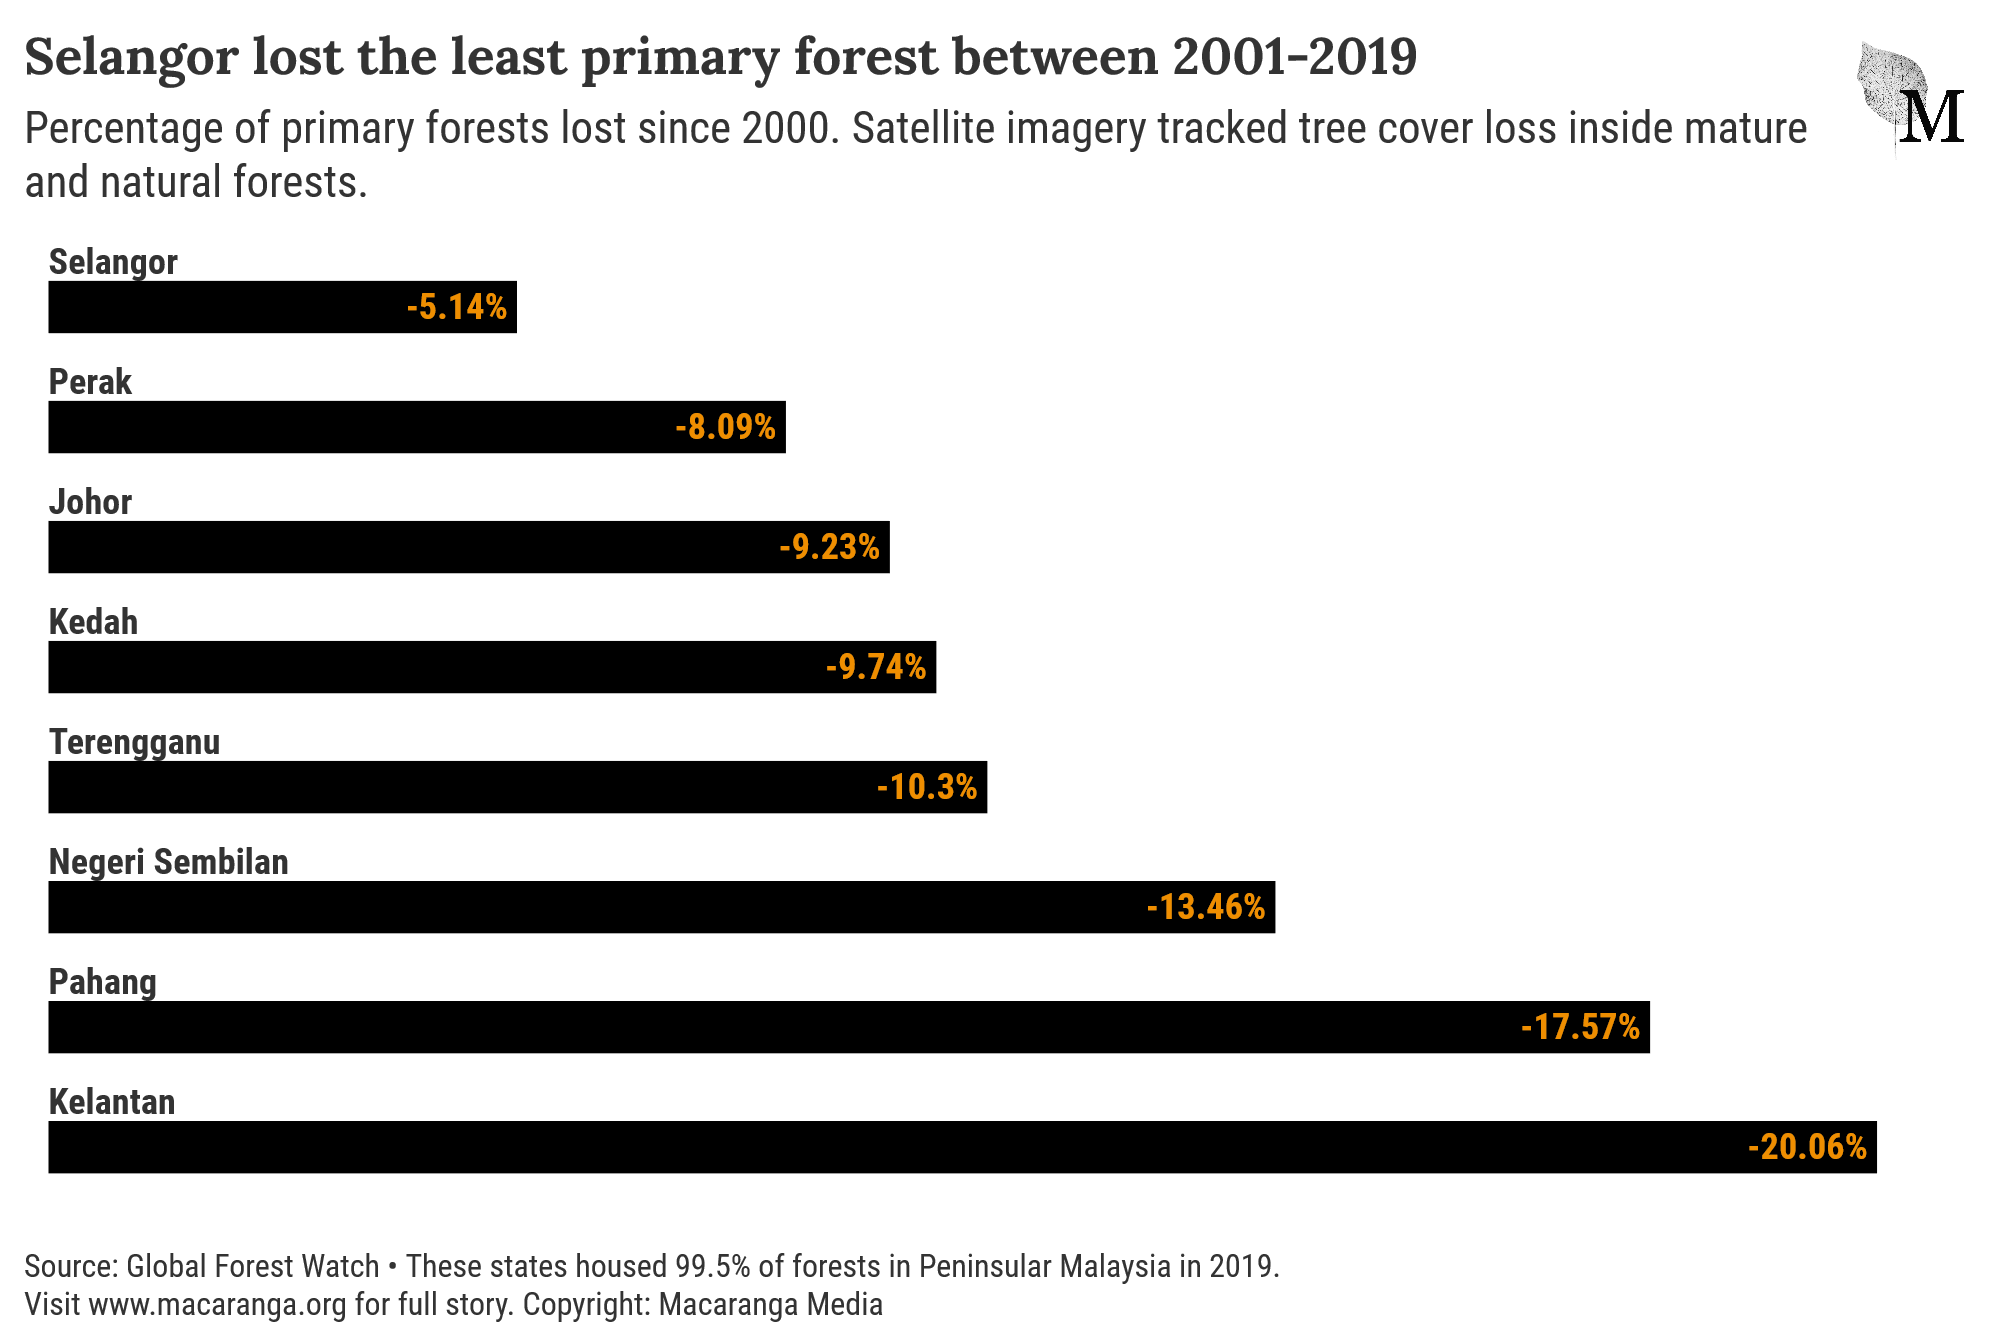 Primary forest loss percentage of states in Peninsular Malaysia, 2001--2019.